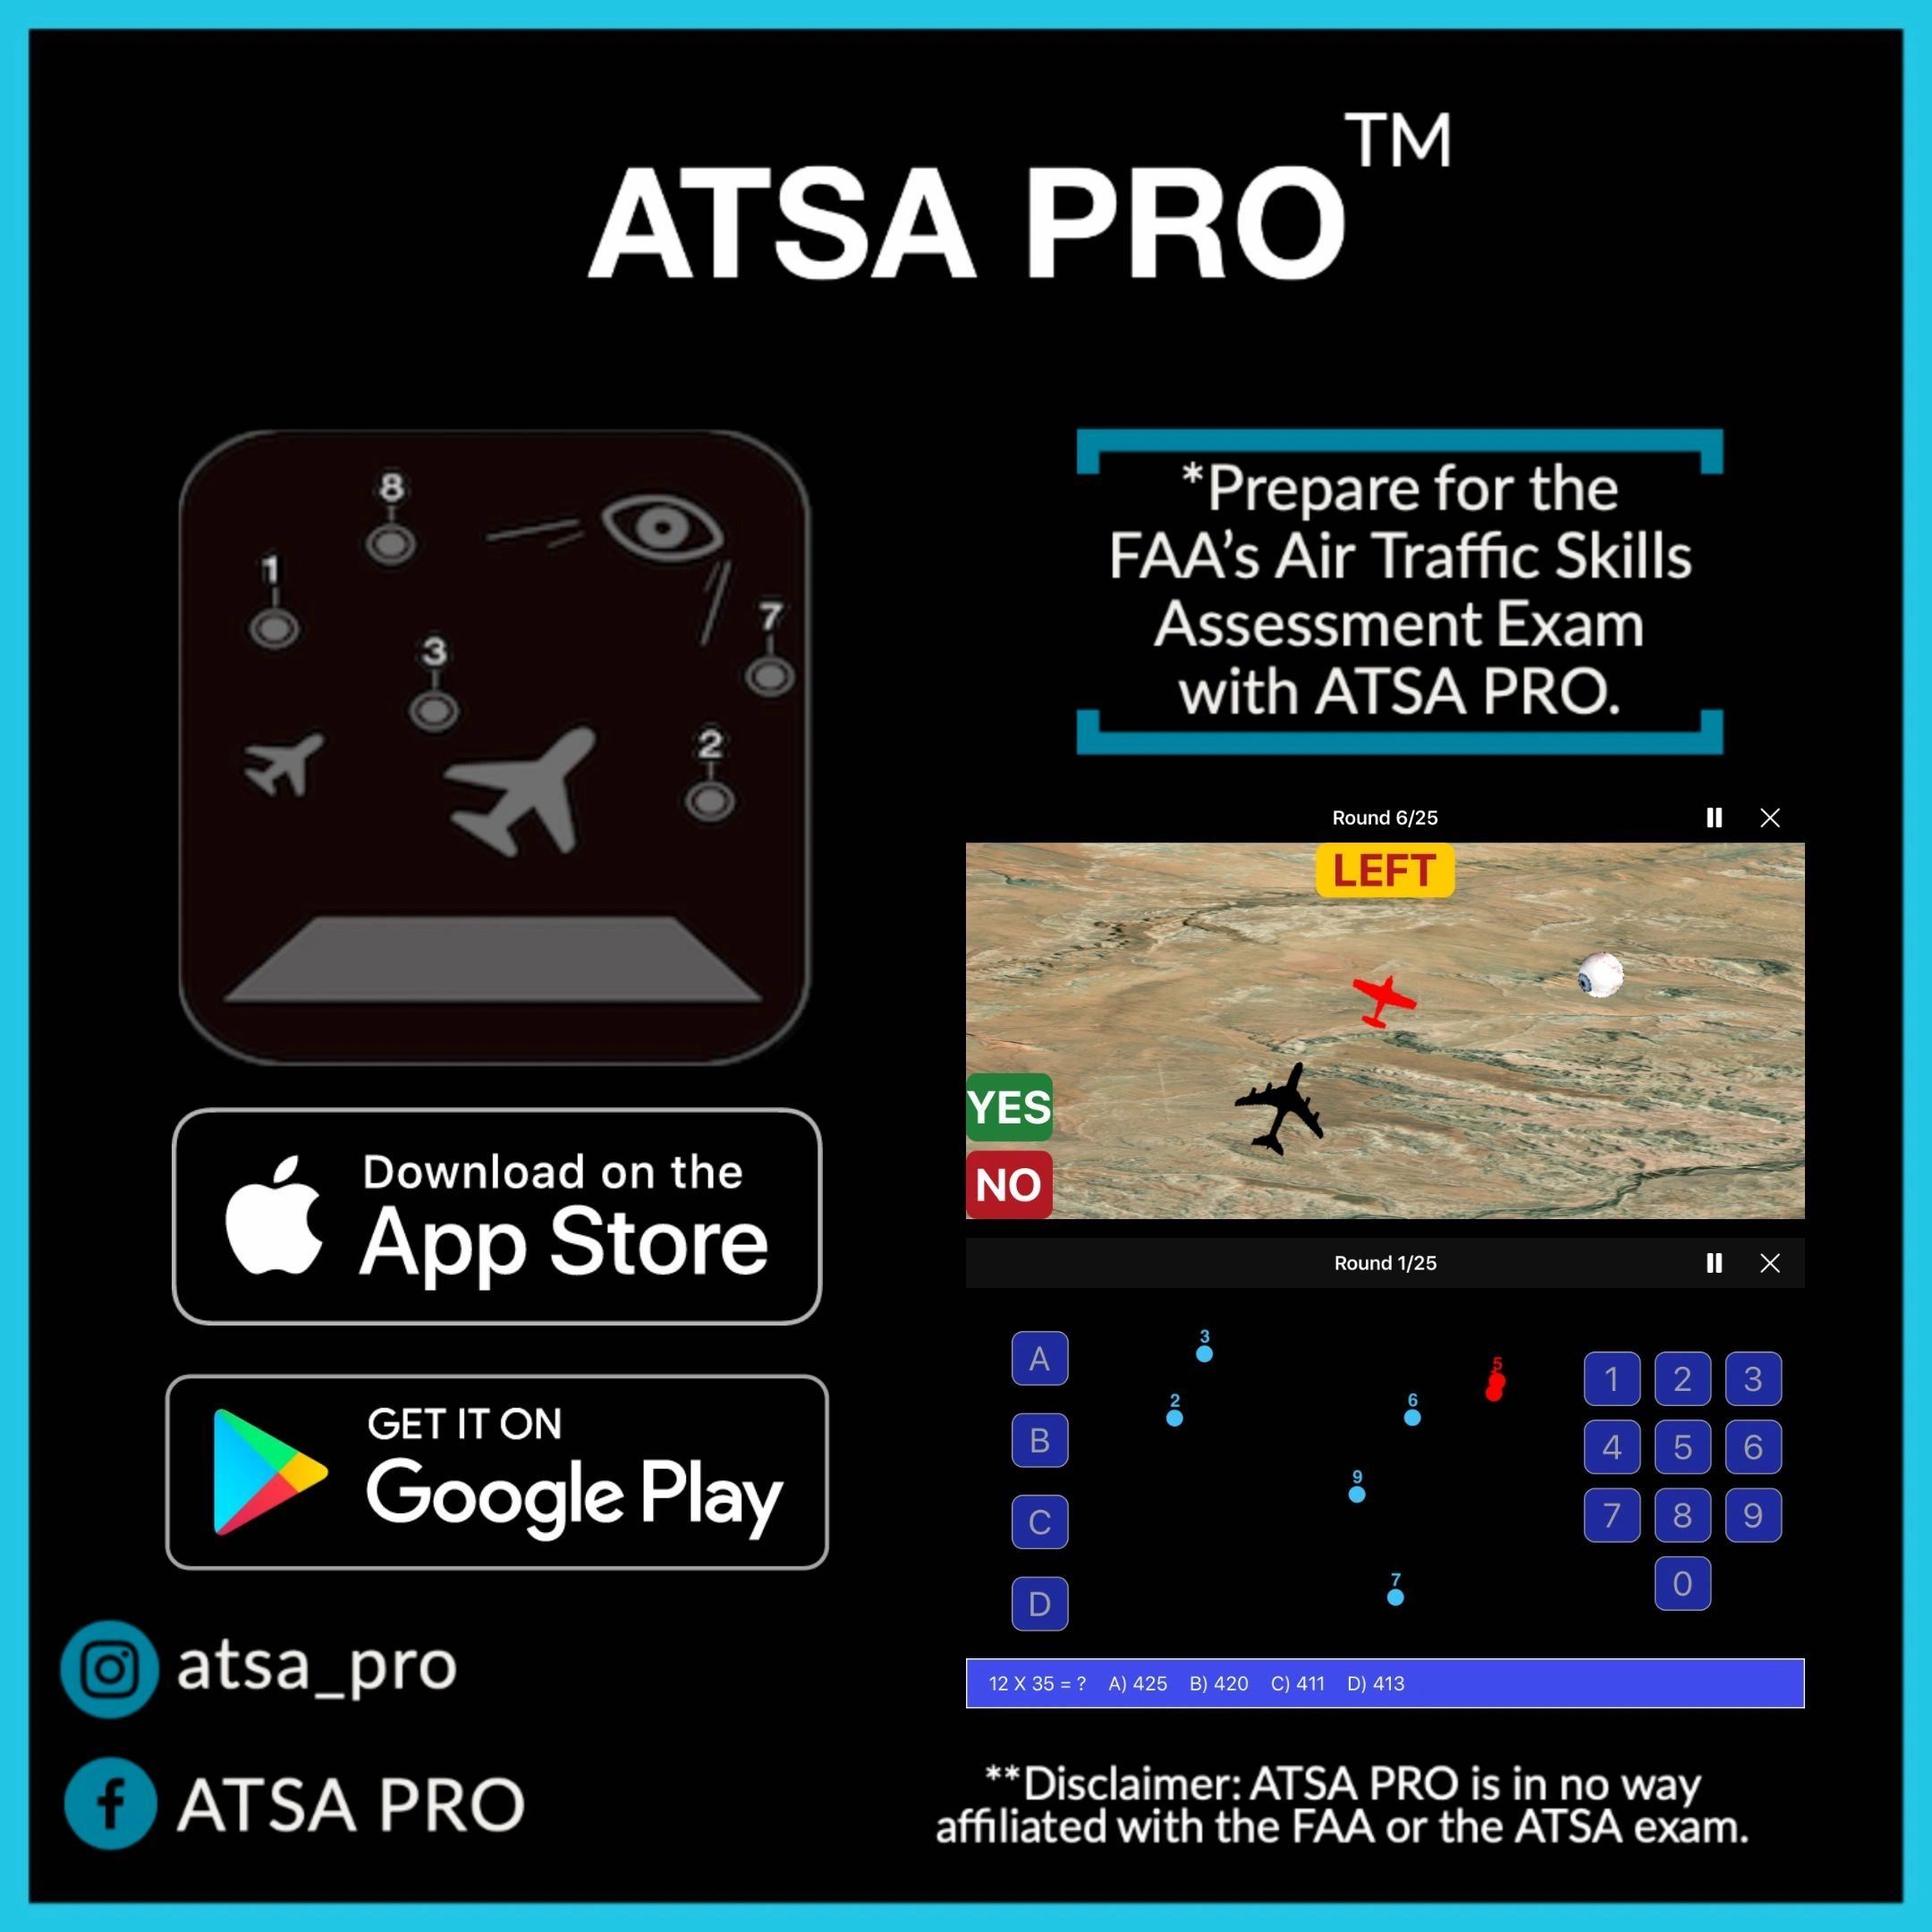 Air Traffic Skills Assessment Exam (ATSA) practice test APP for IOS and Android, ATSA PRO.